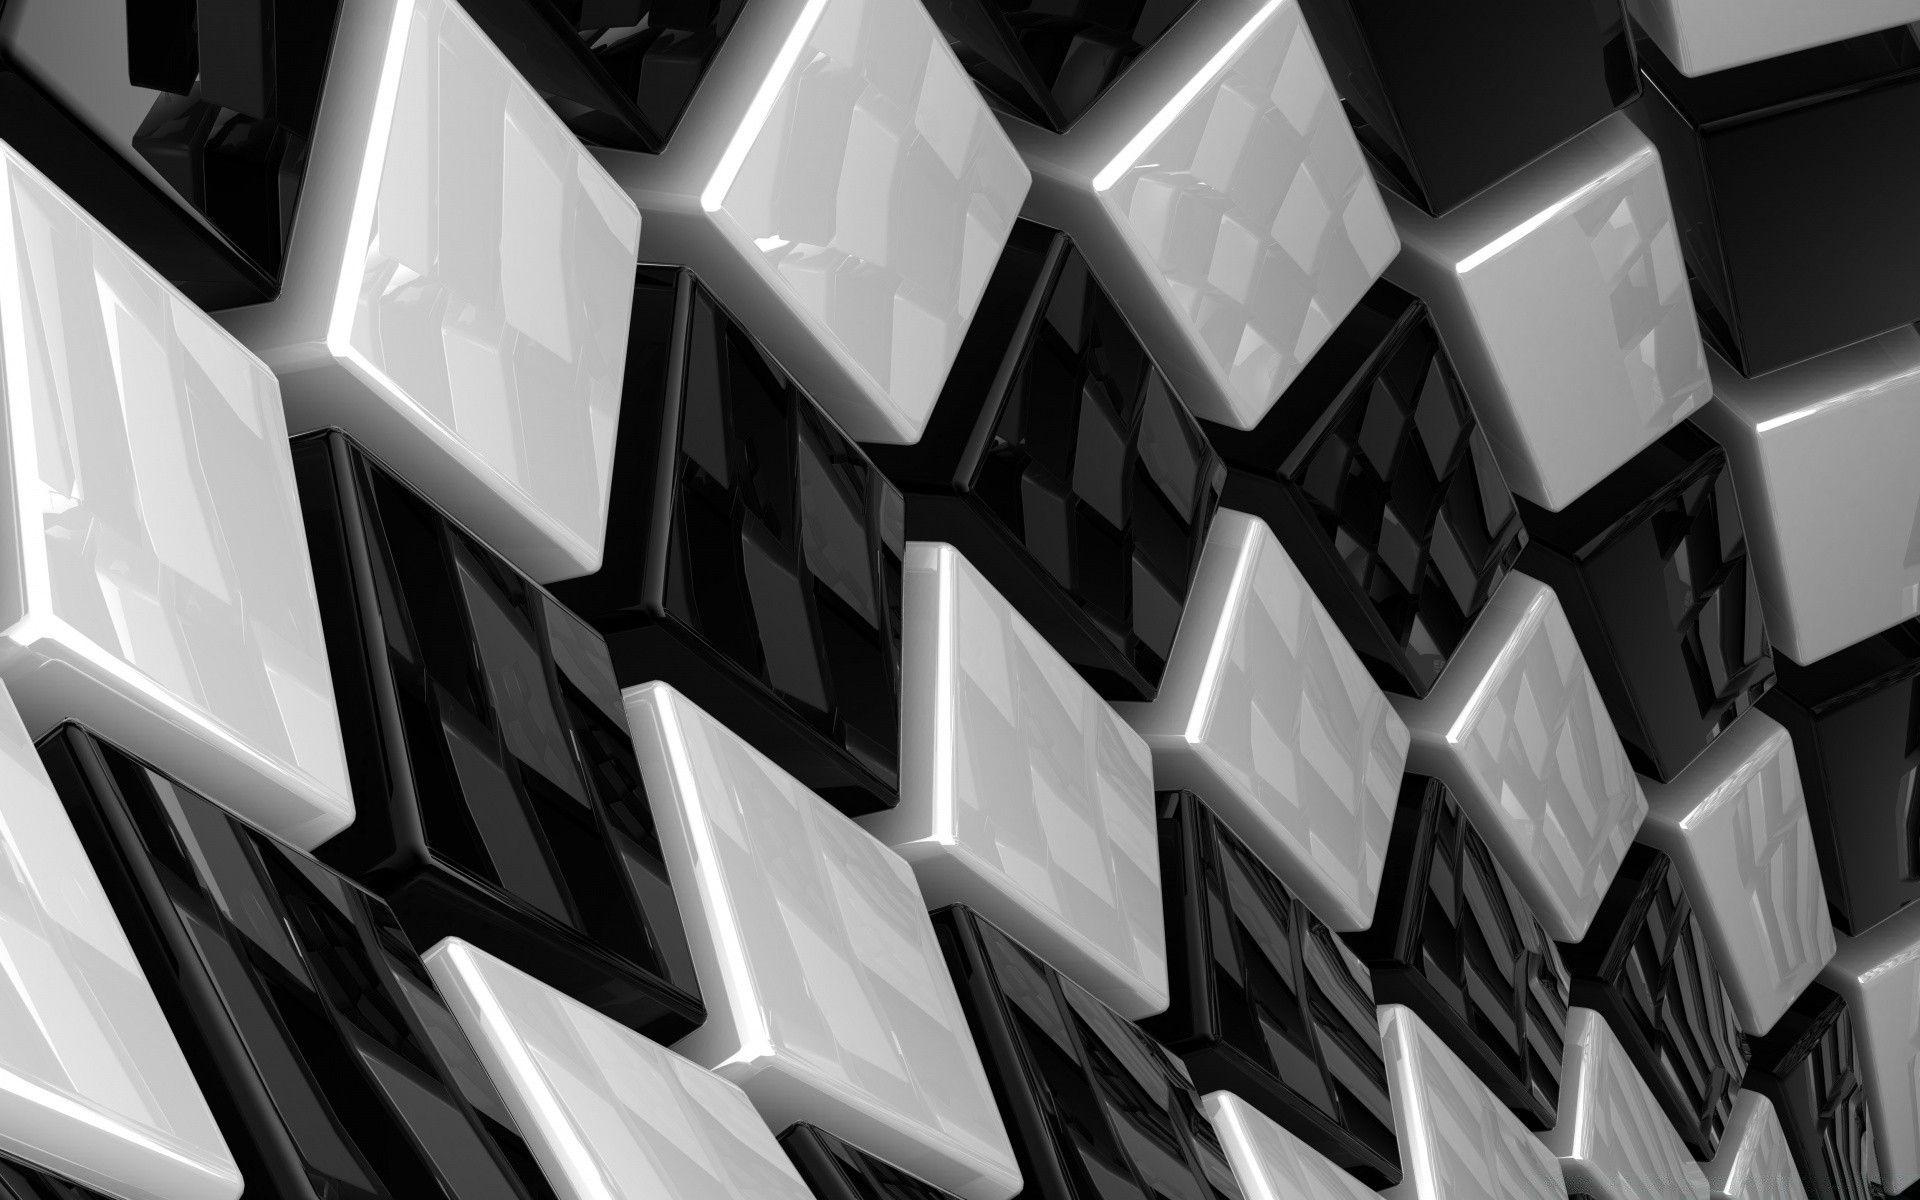 3D Cubes Black And White. iPhone wallpaper for free